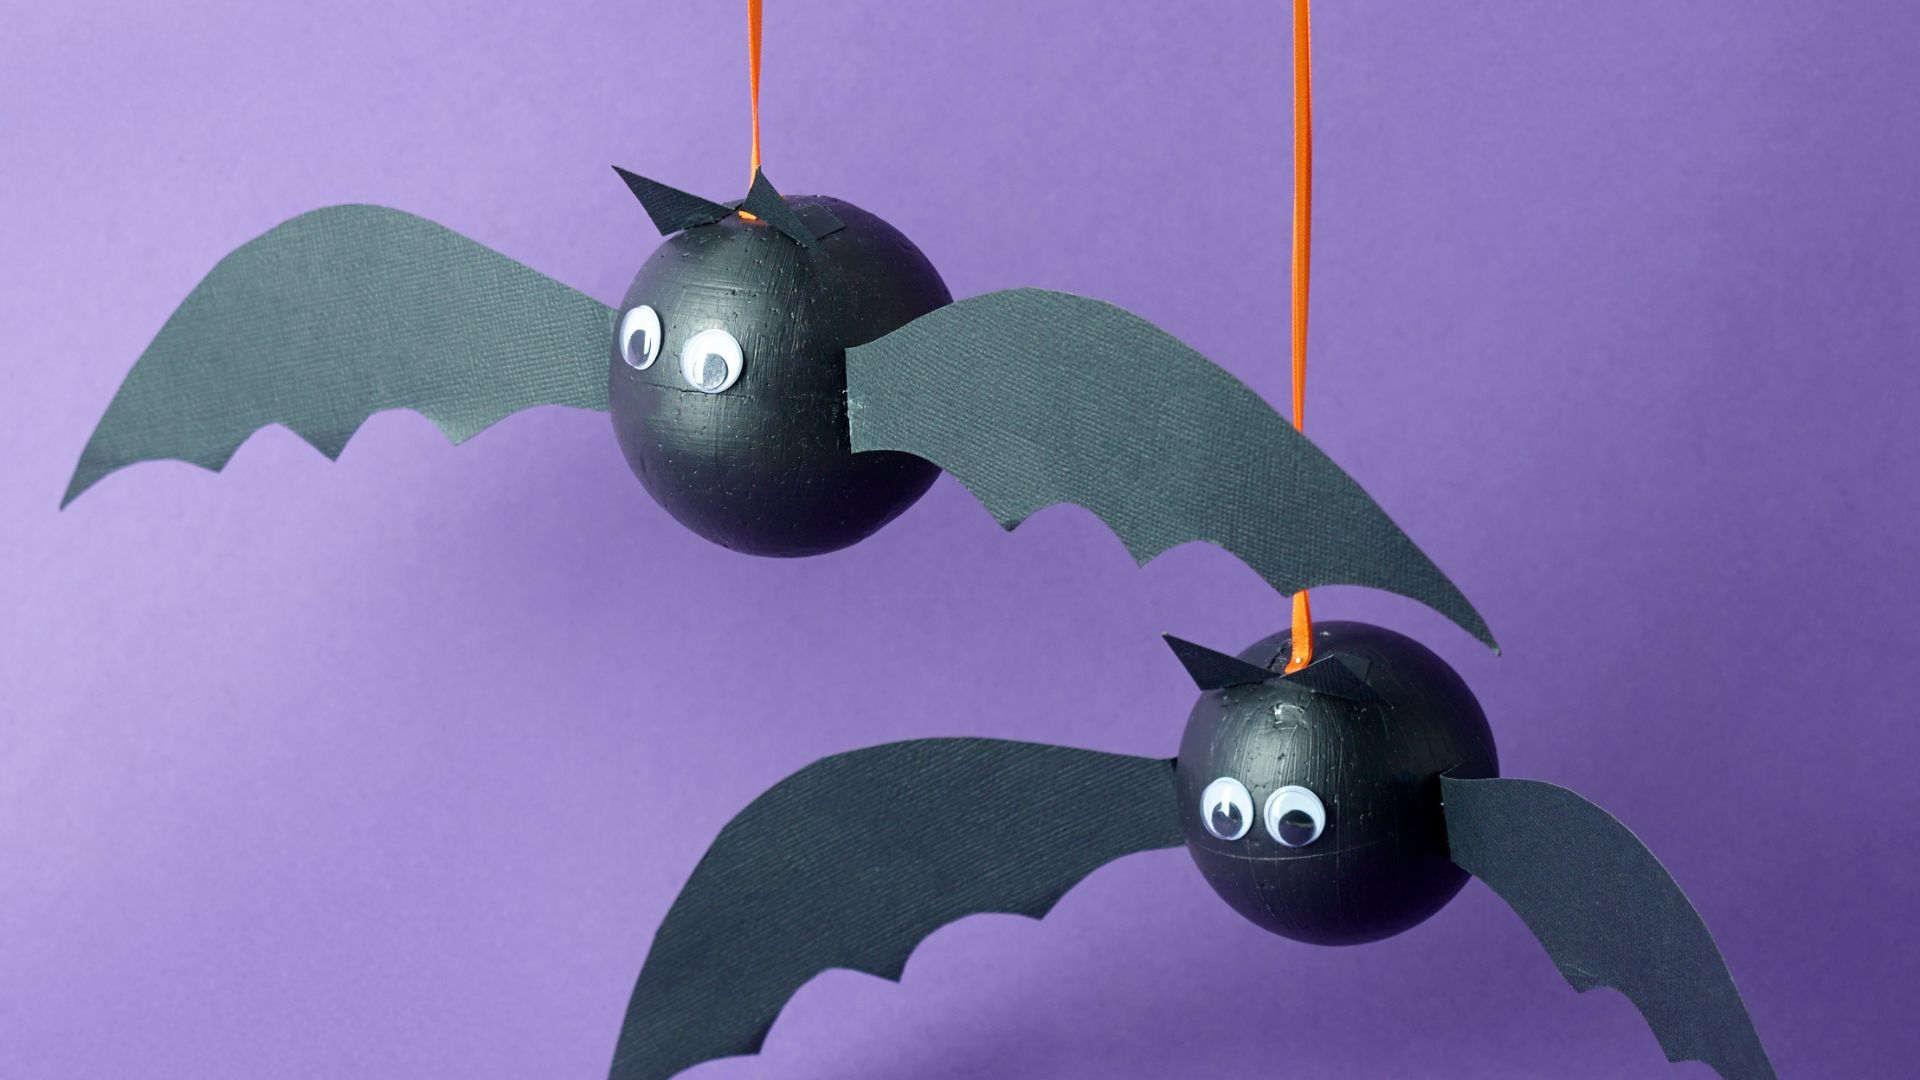 Get the kids involved and create some hand-crafted Halloween decorations